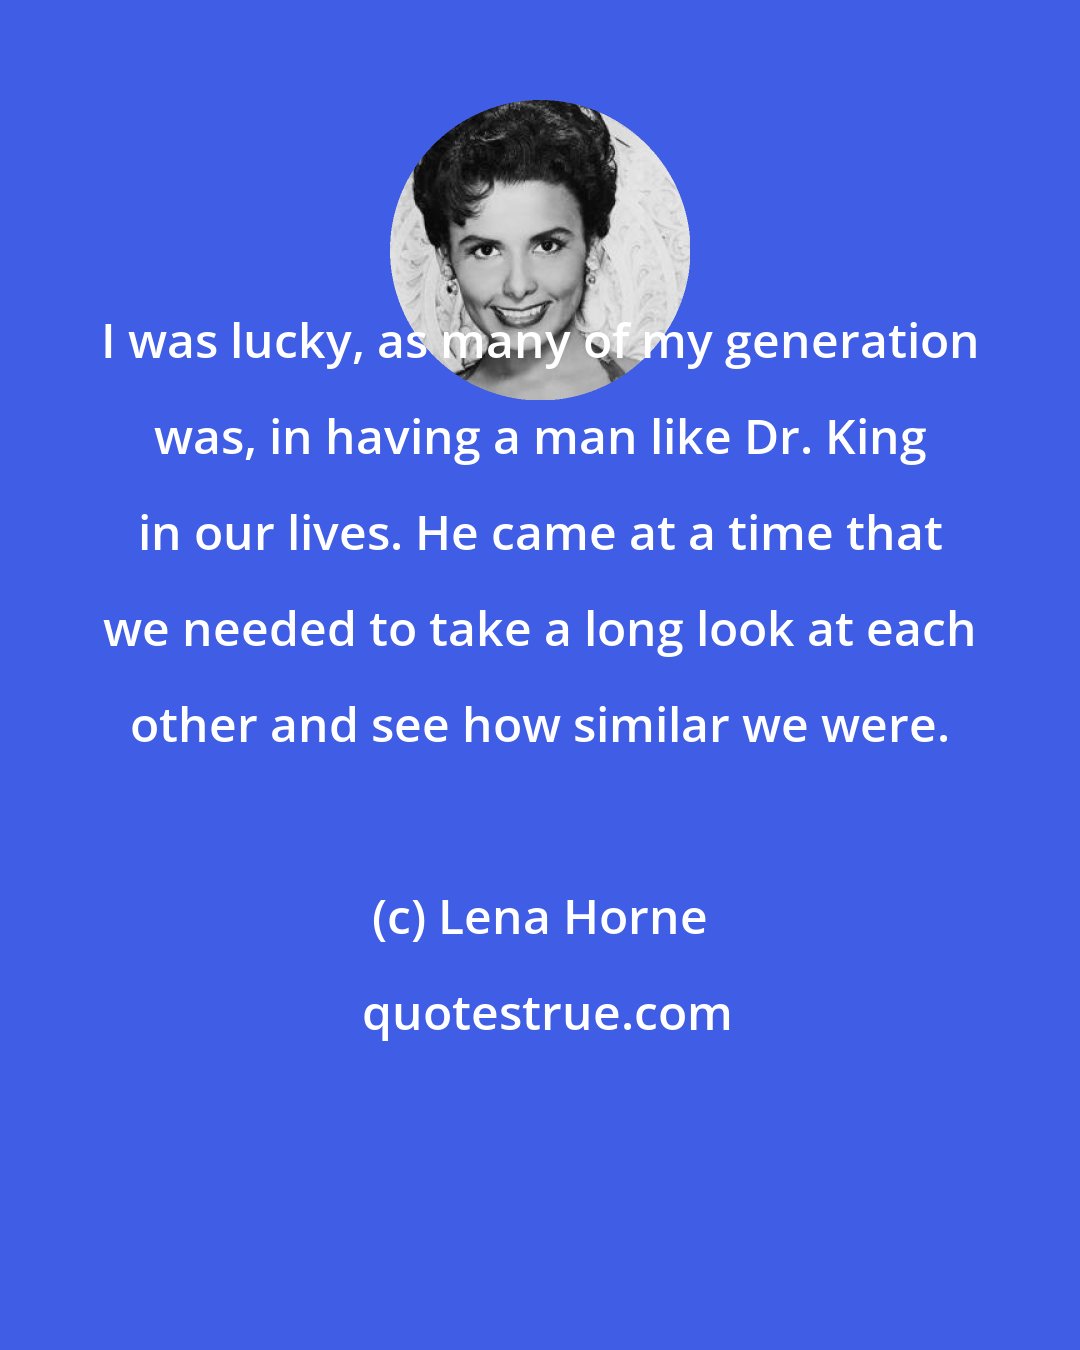 Lena Horne: I was lucky, as many of my generation was, in having a man like Dr. King in our lives. He came at a time that we needed to take a long look at each other and see how similar we were.